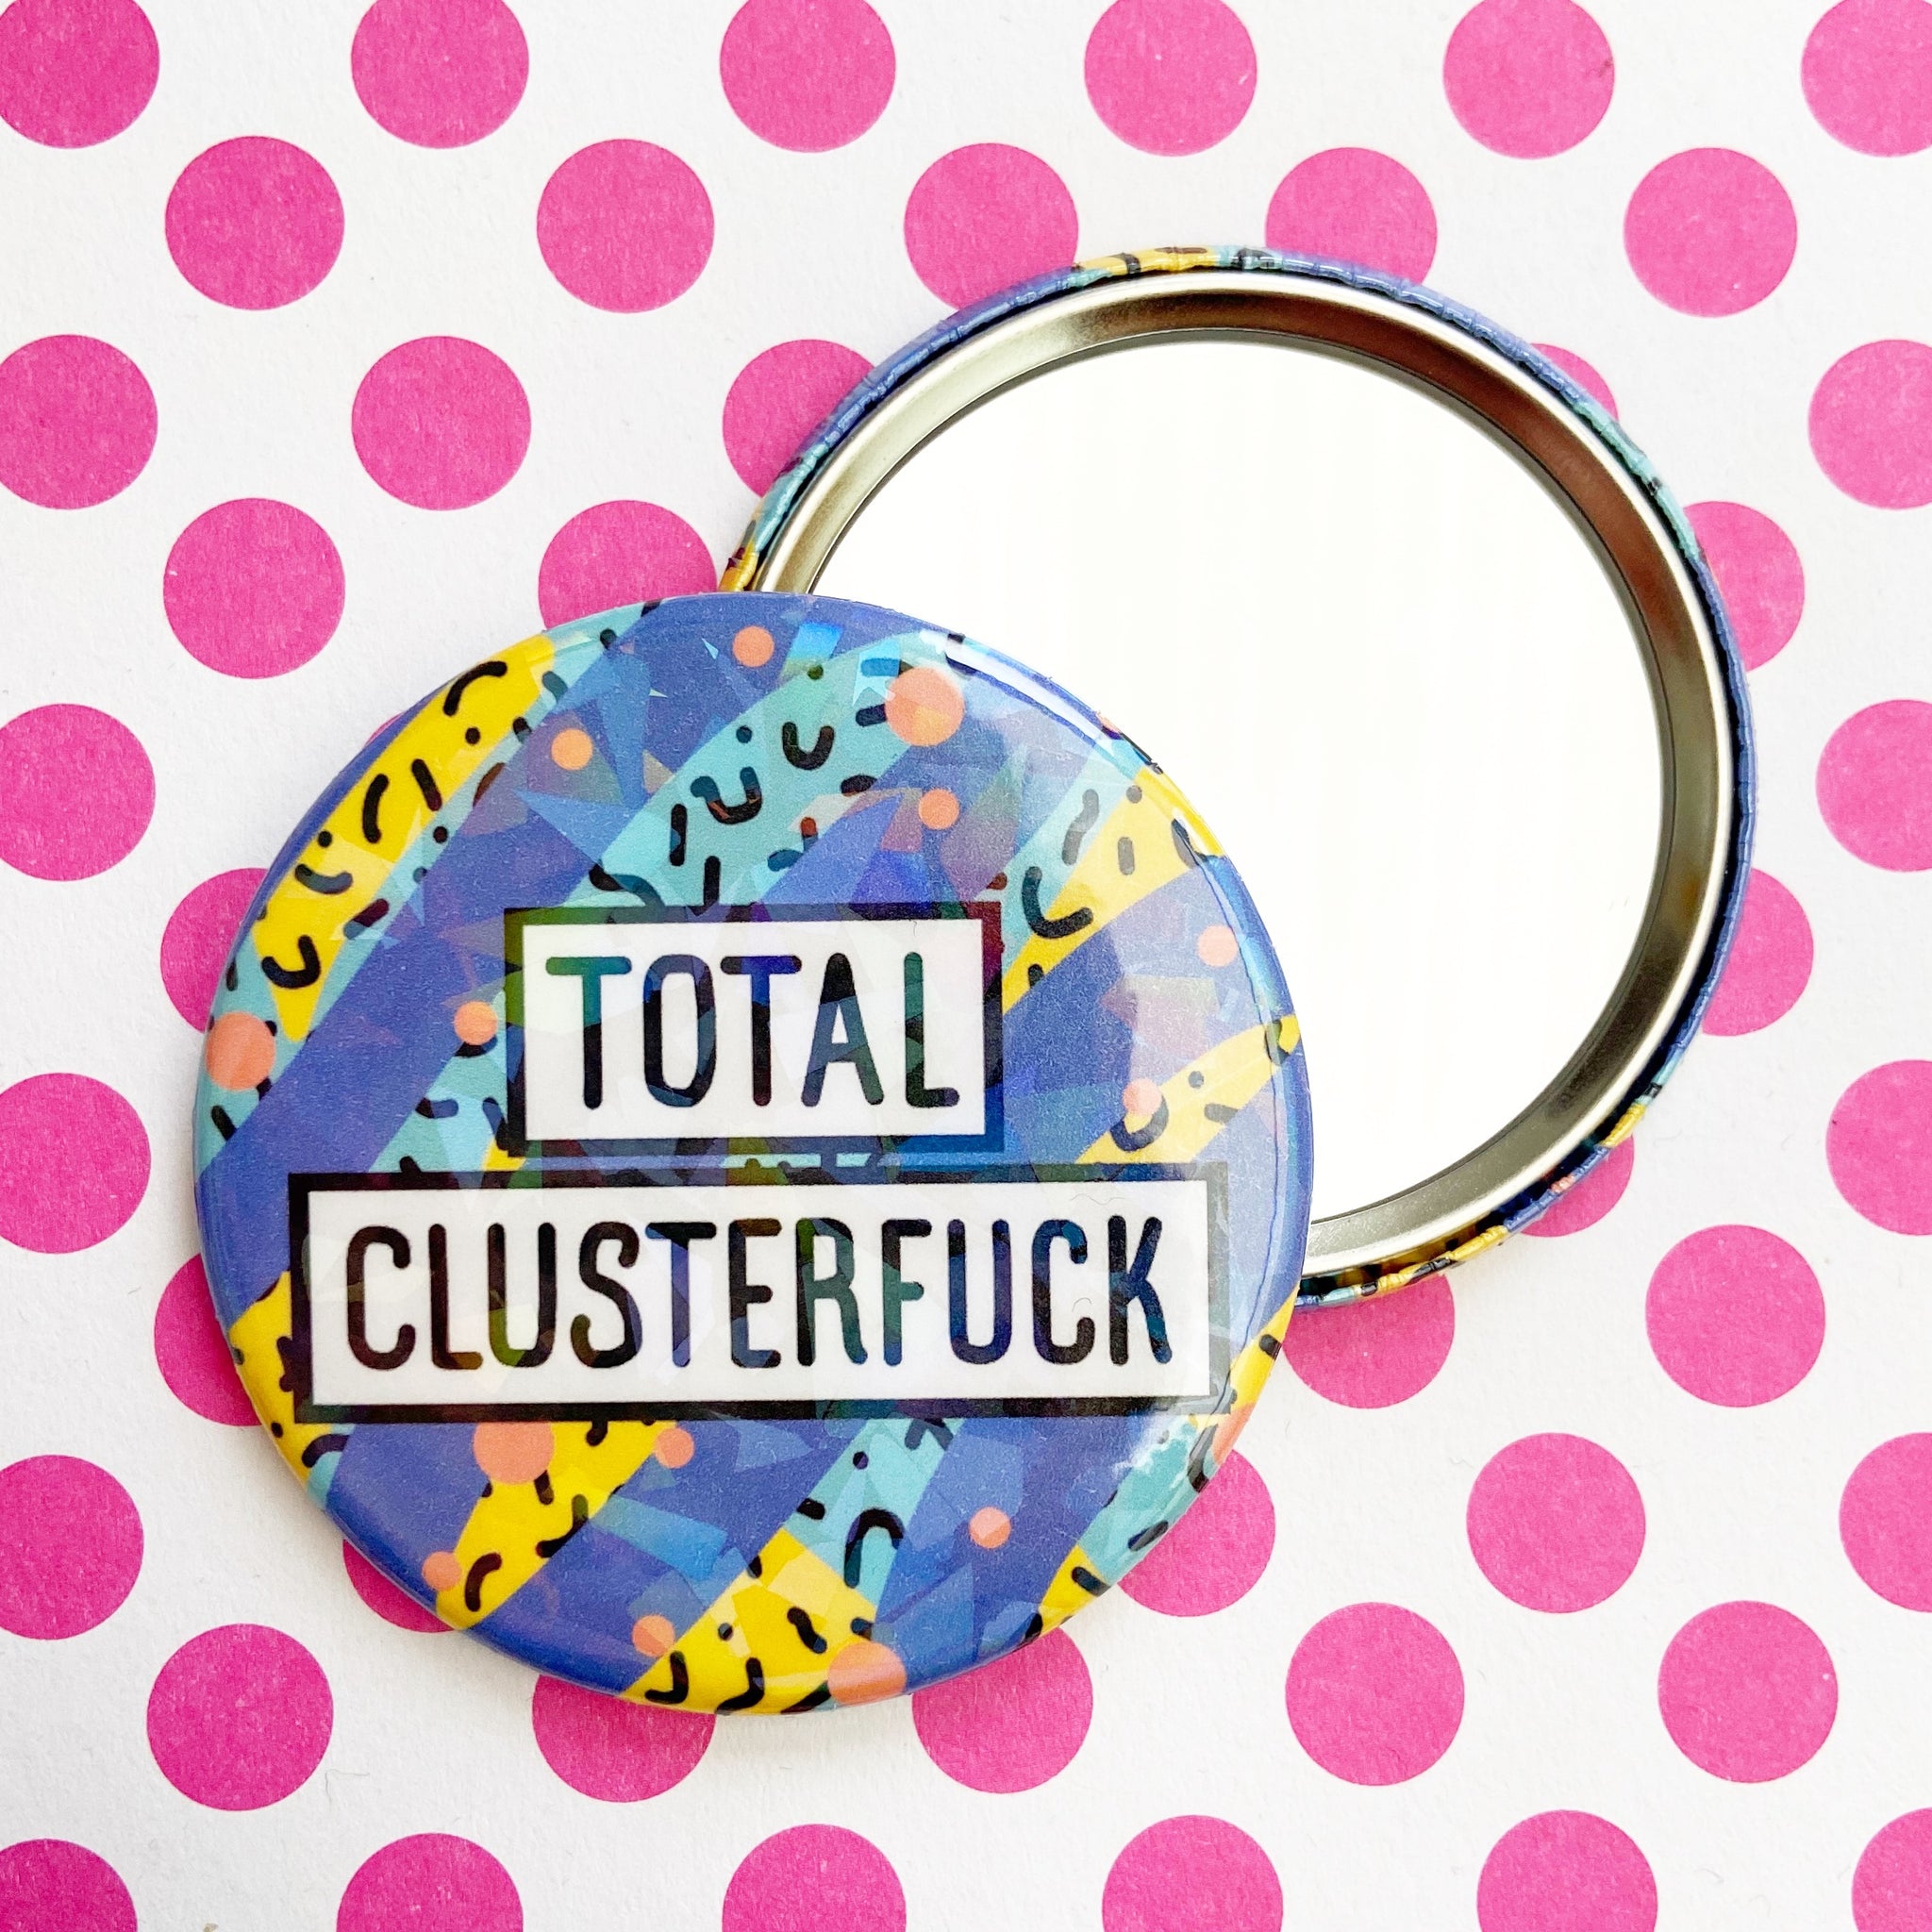 Total Clusterfuck Pocket Mirror (Holo Finish)